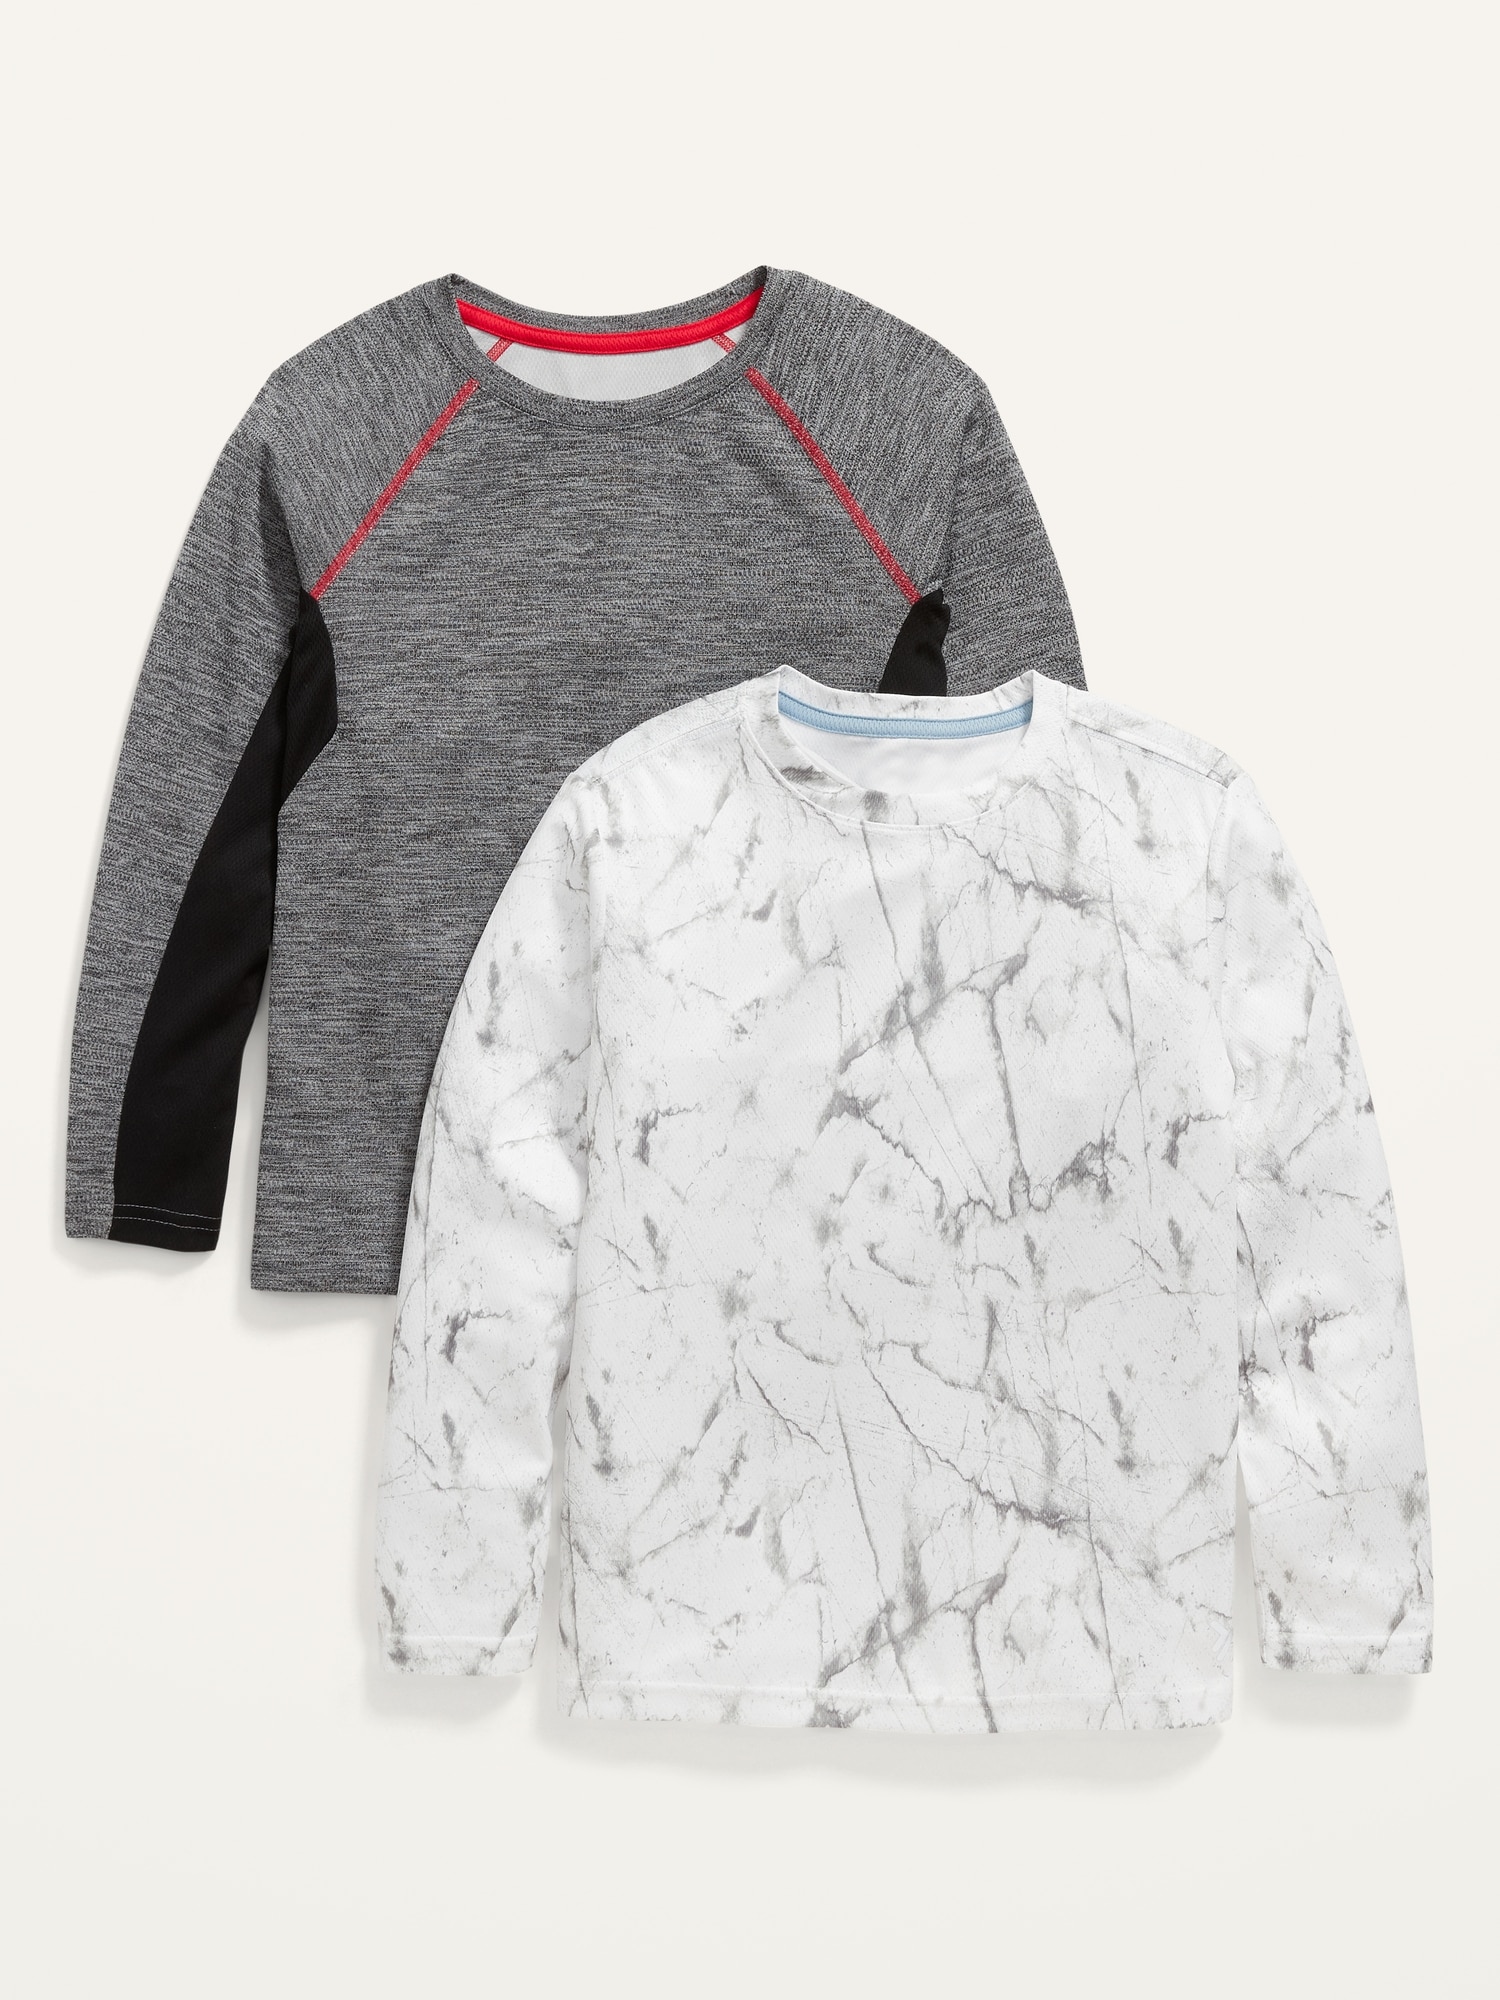 Go-Dry Cool Long-Sleeve Mesh T-Shirt 2-Pack for Boys | Old Navy